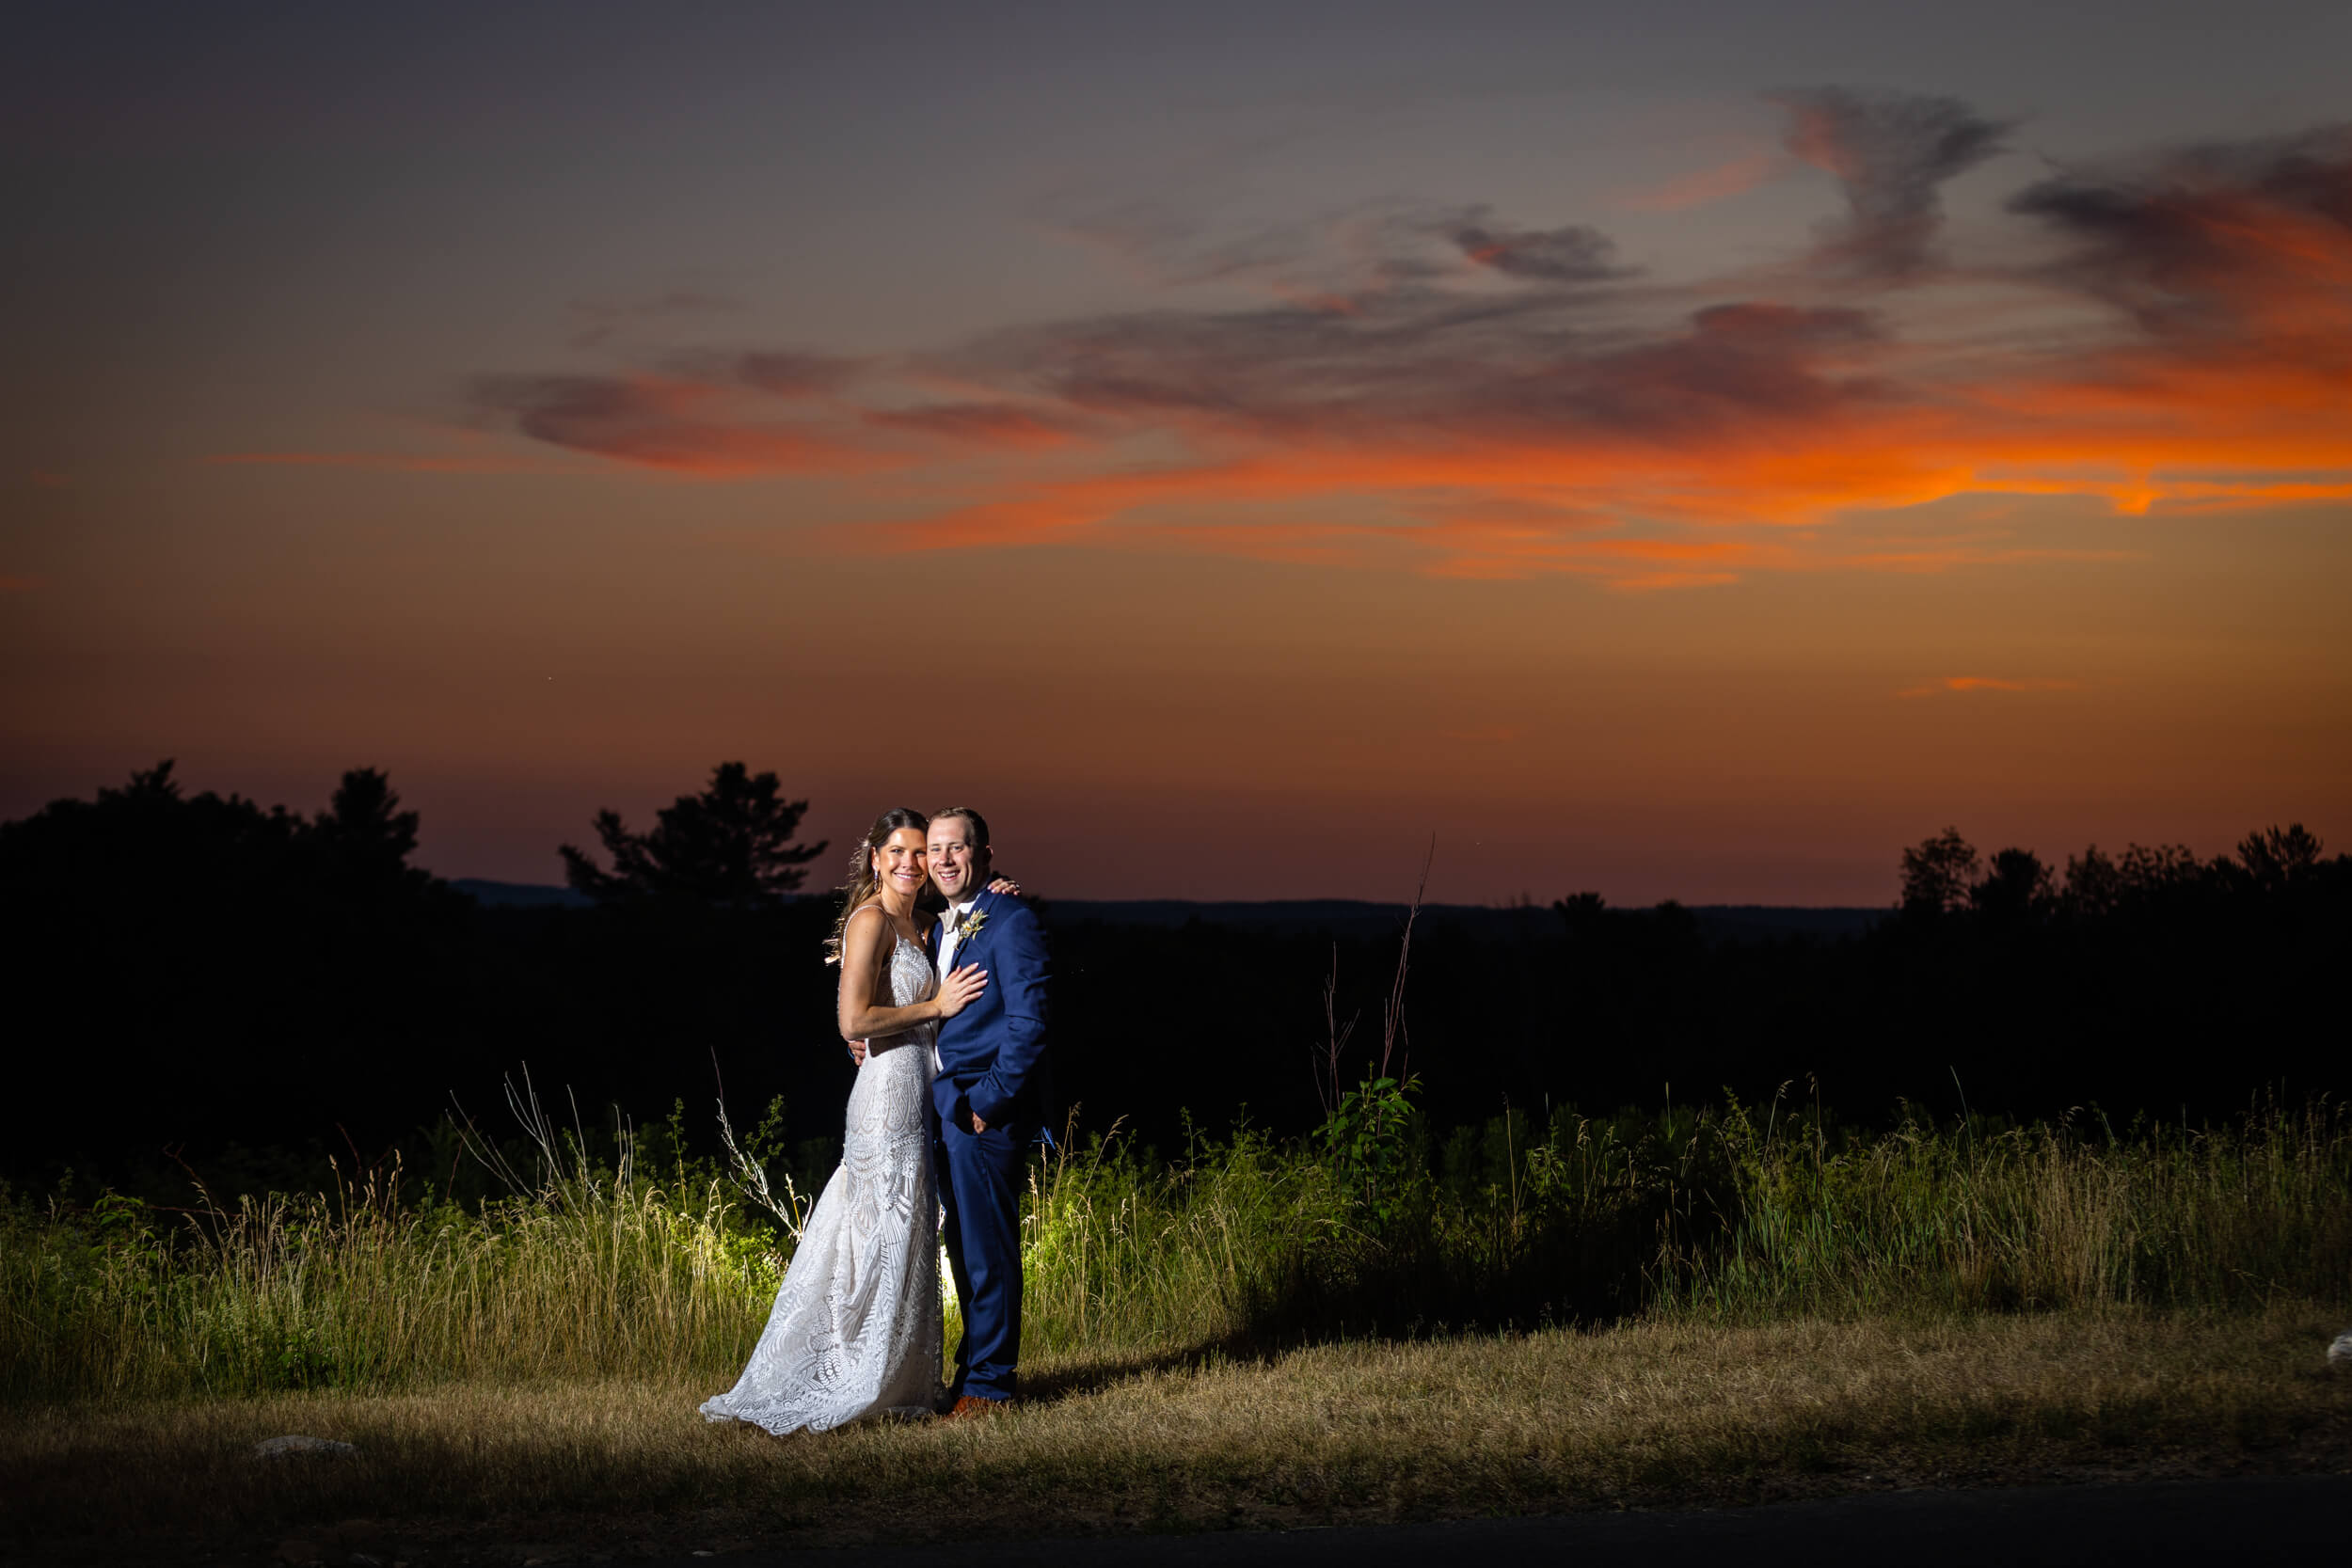 Bride in great gatsby gown and groom in blue suit embracing for vibrant sunset wedding photo at Harrington princeton ma